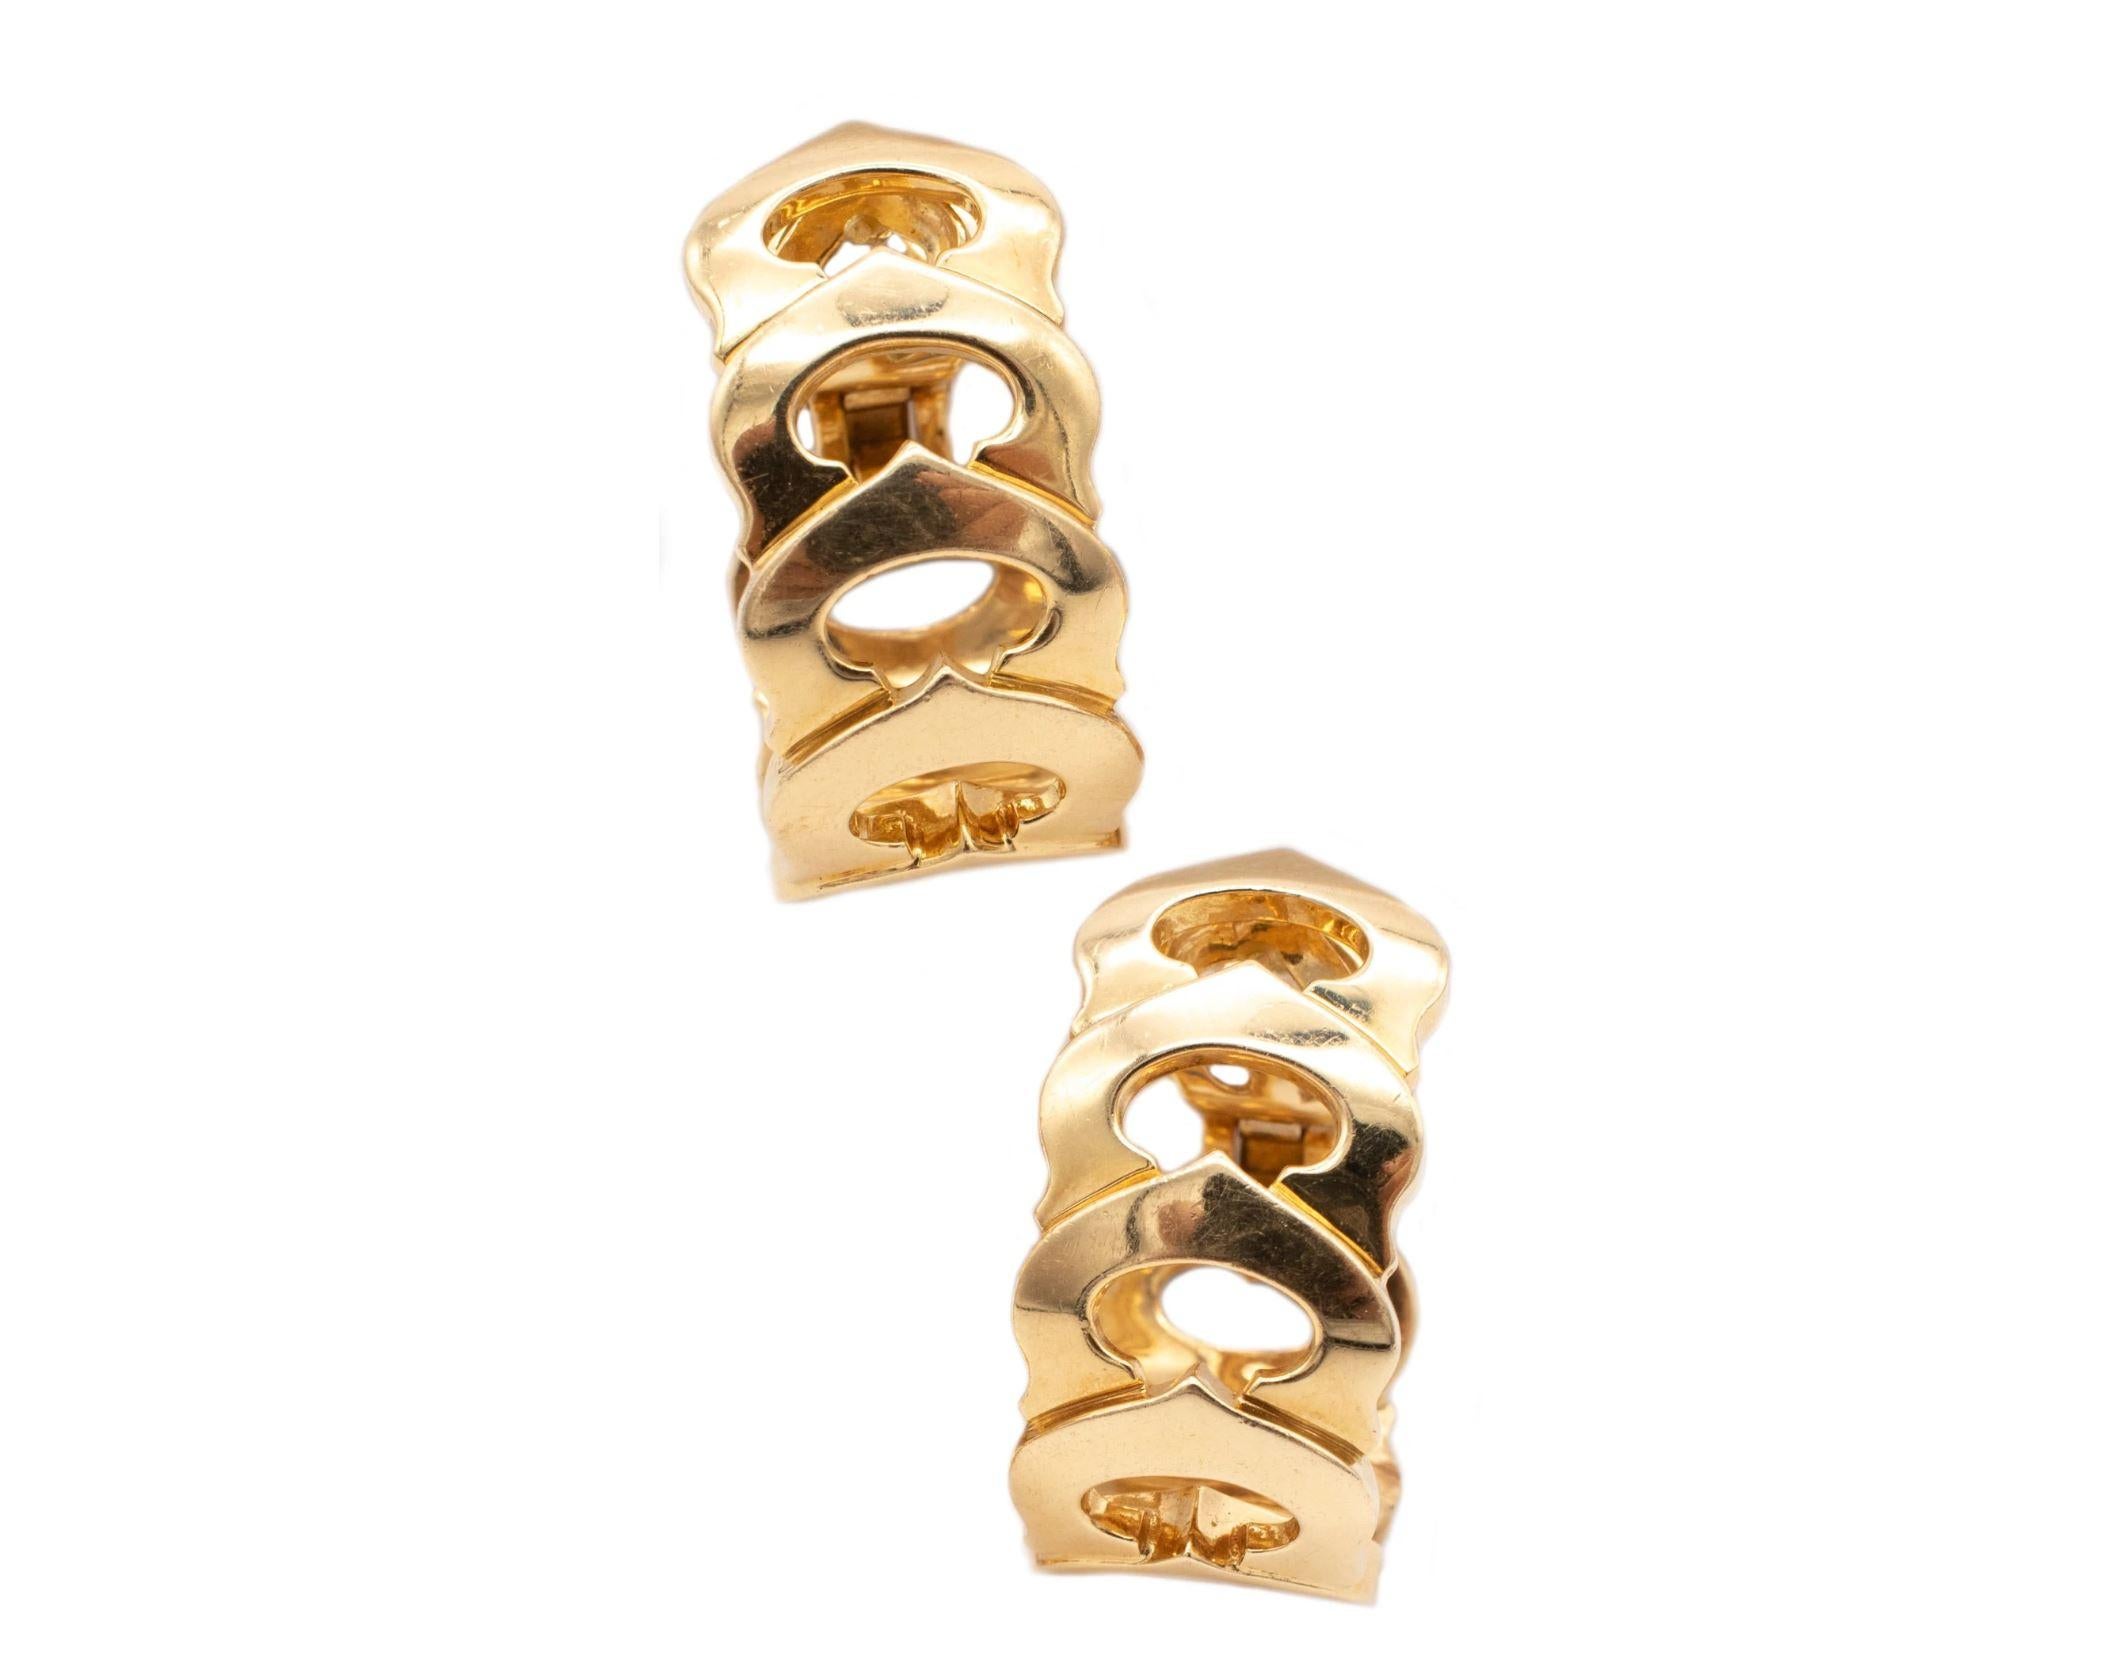 Great pair of hoop earrings designed by Cartier.

A beautiful iconic creation made in Paris France by the house of Cartier. These nice pair of hoop earrings has been crafted in solid yellow gold of 18 karats with high polished finish. They are part